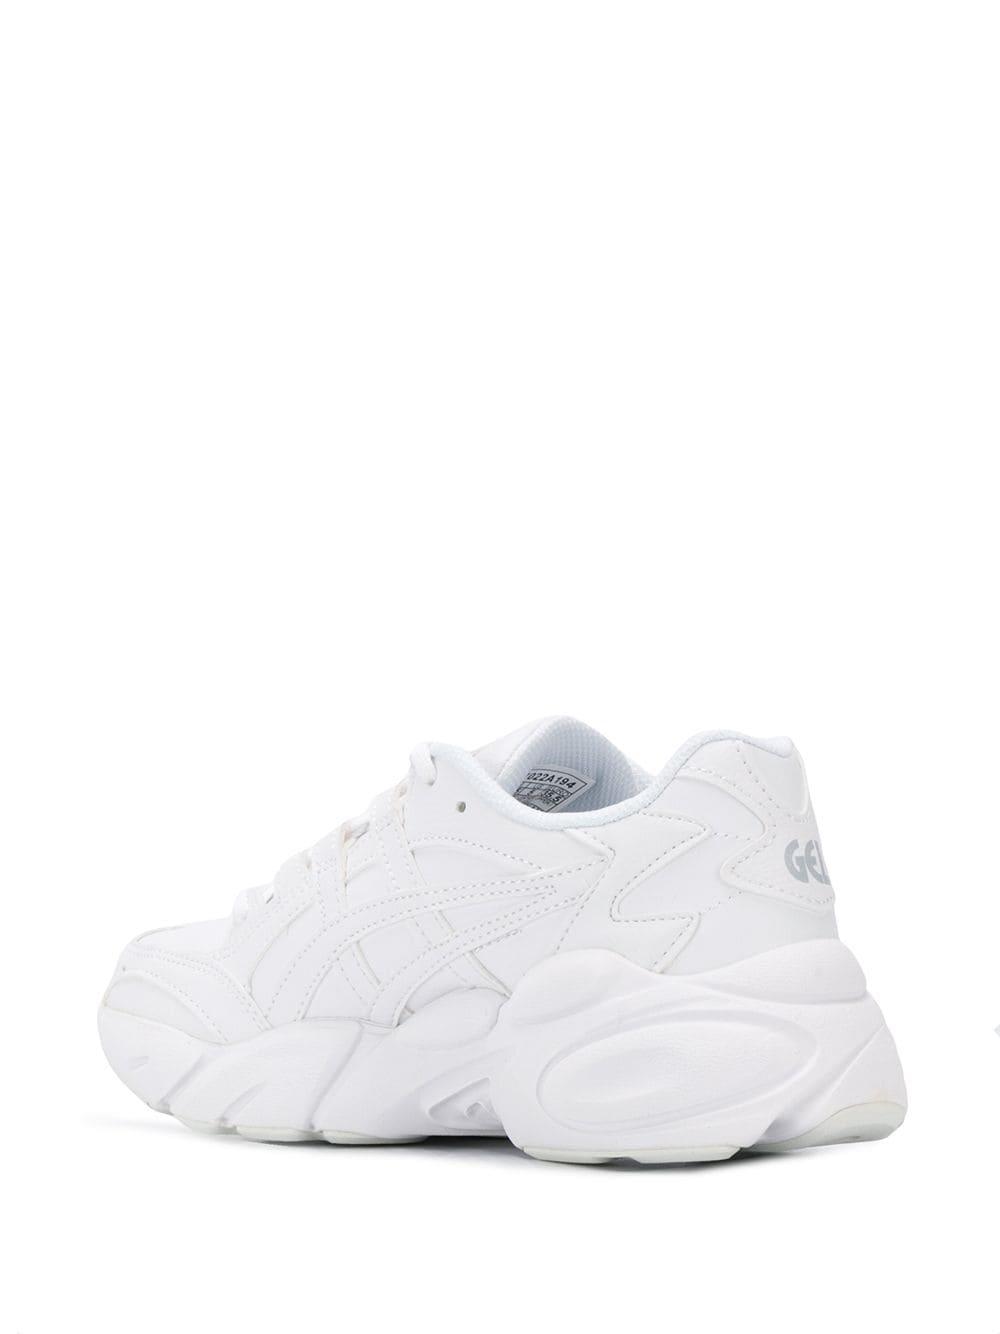 Asics Chunky Top Sneakers in White | Lyst